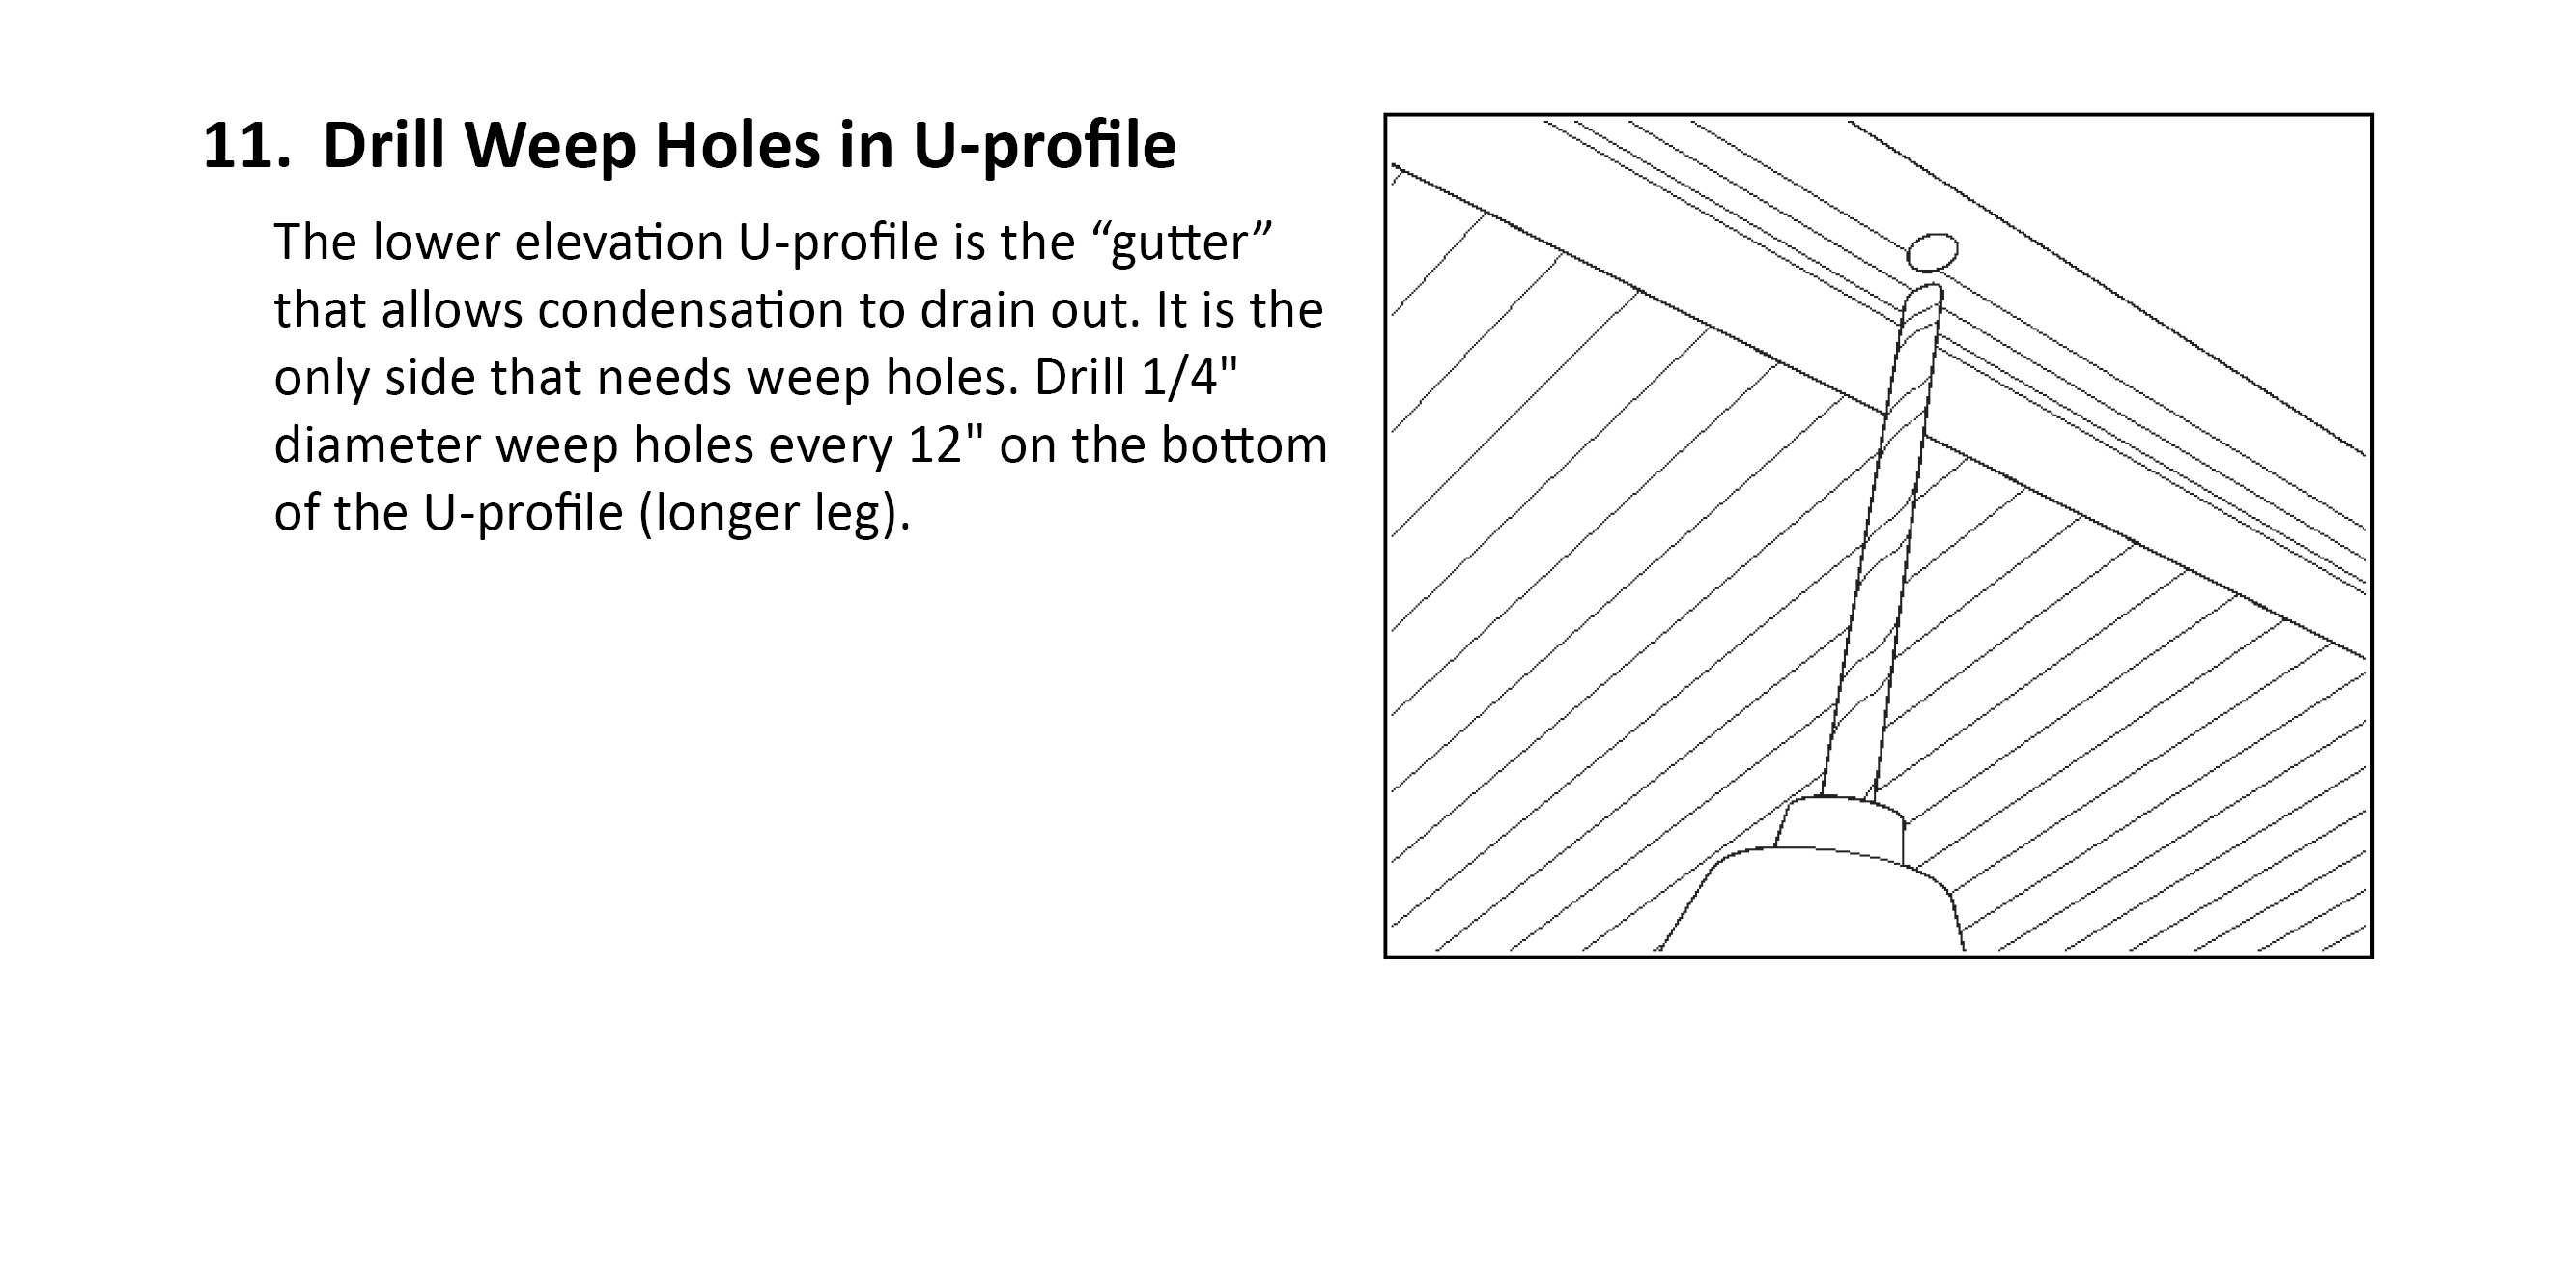 Drill Weep Holes in U-profile